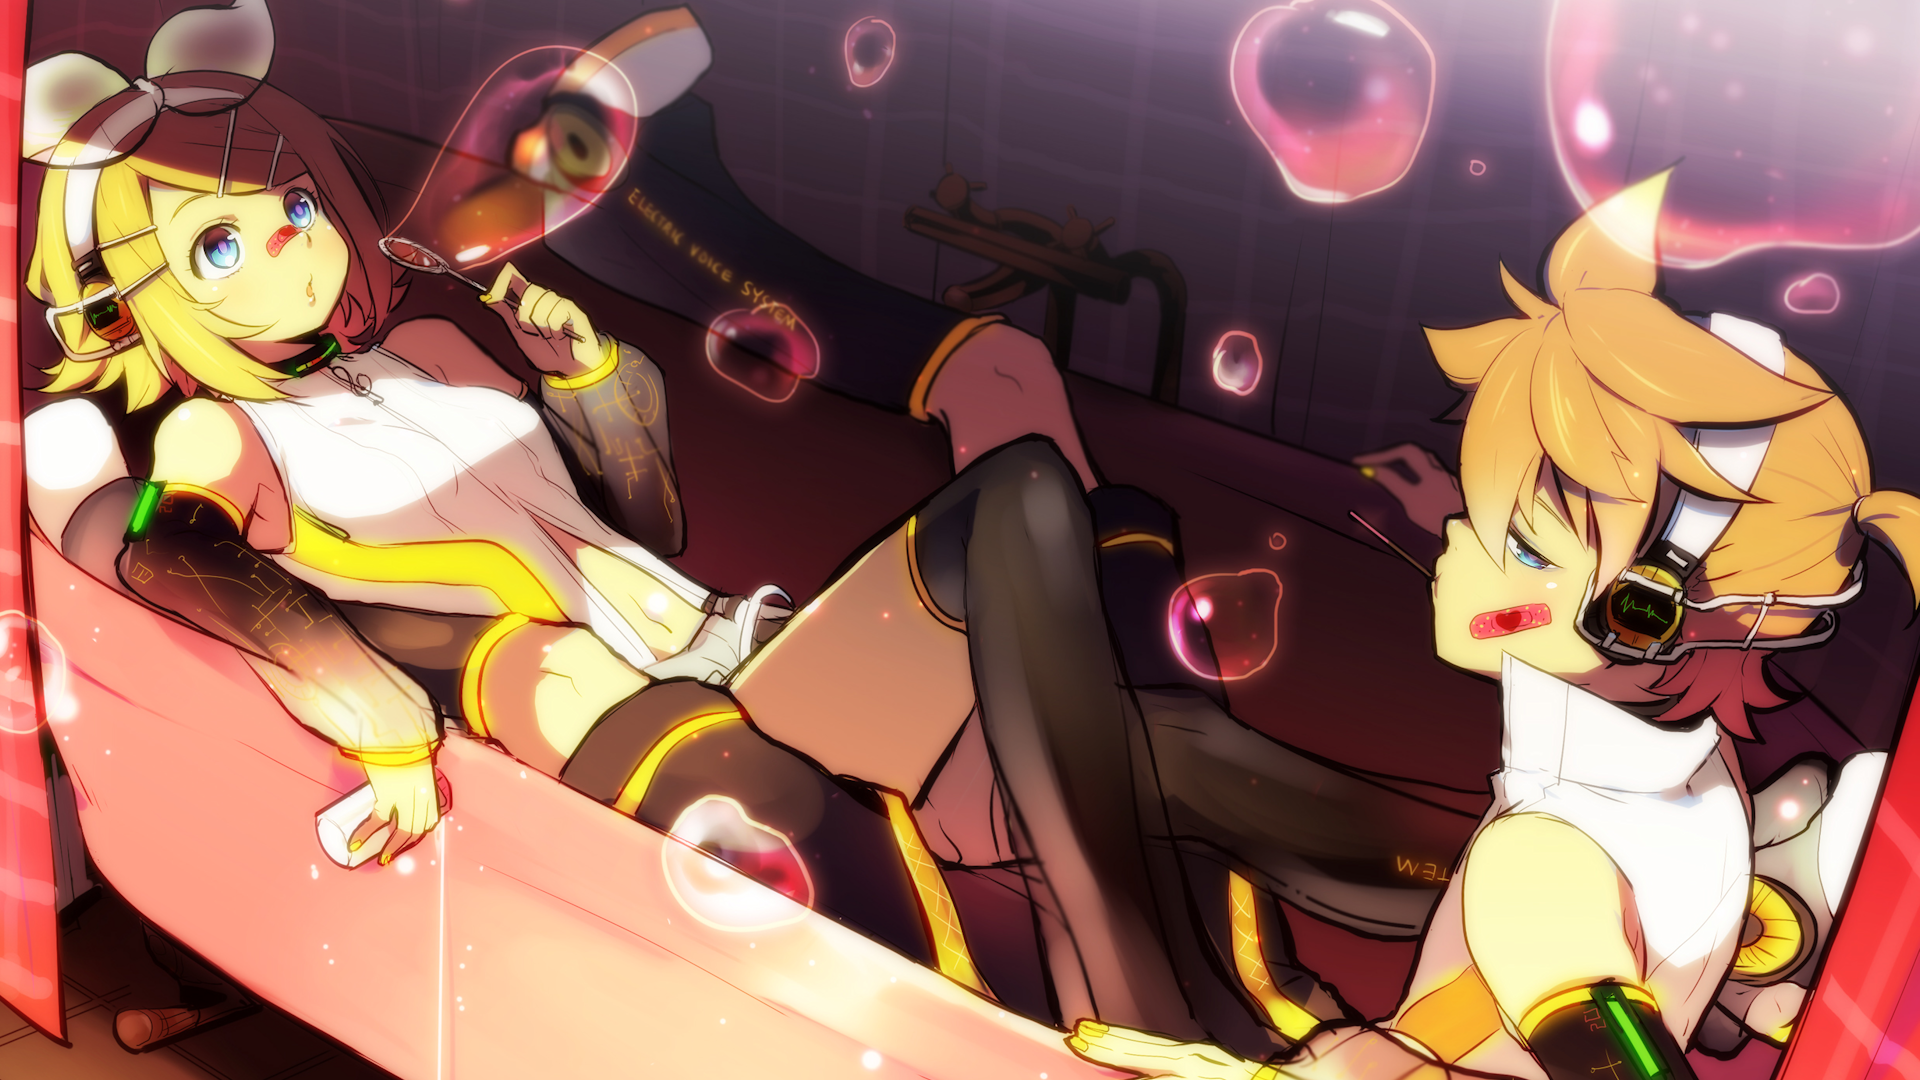 Kagamine Rin and Len append with bubbles  by KL